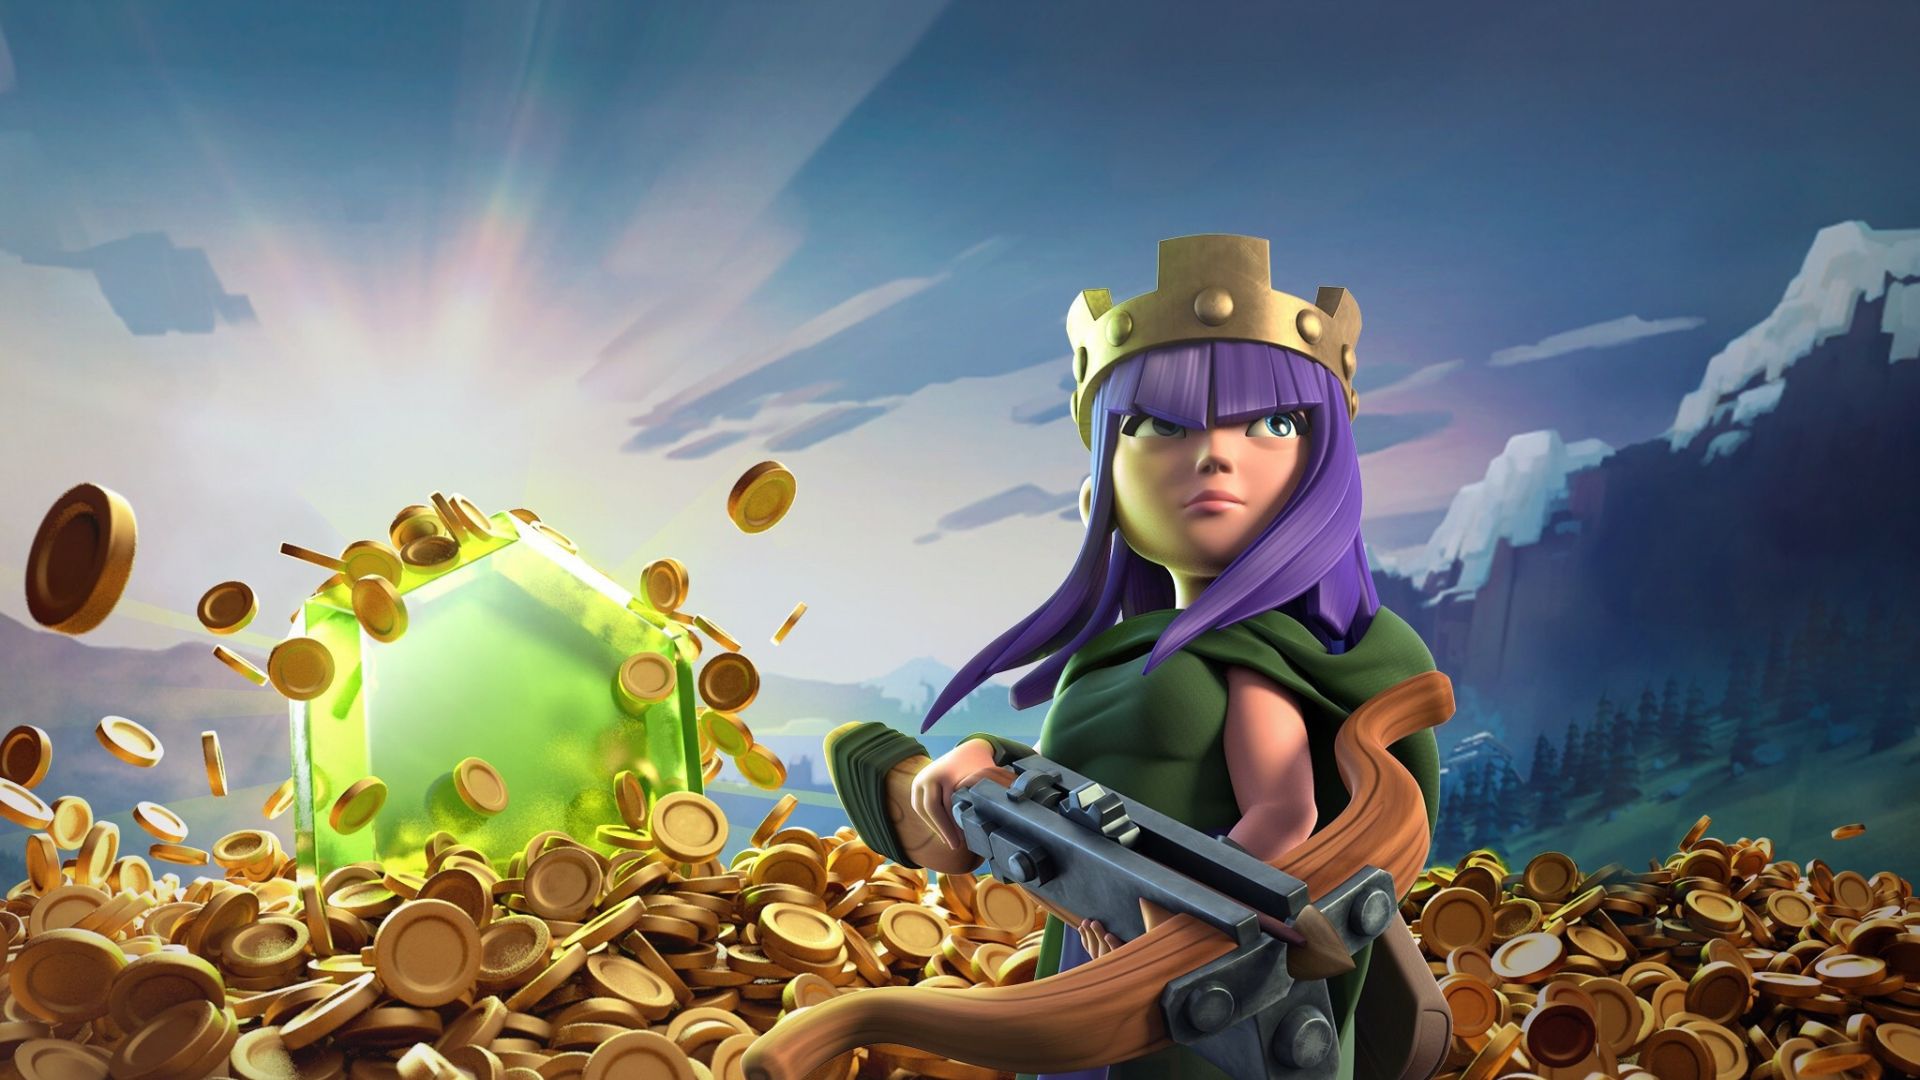 Wallpaper Clash of clans, mobile game, coins, girl warrior